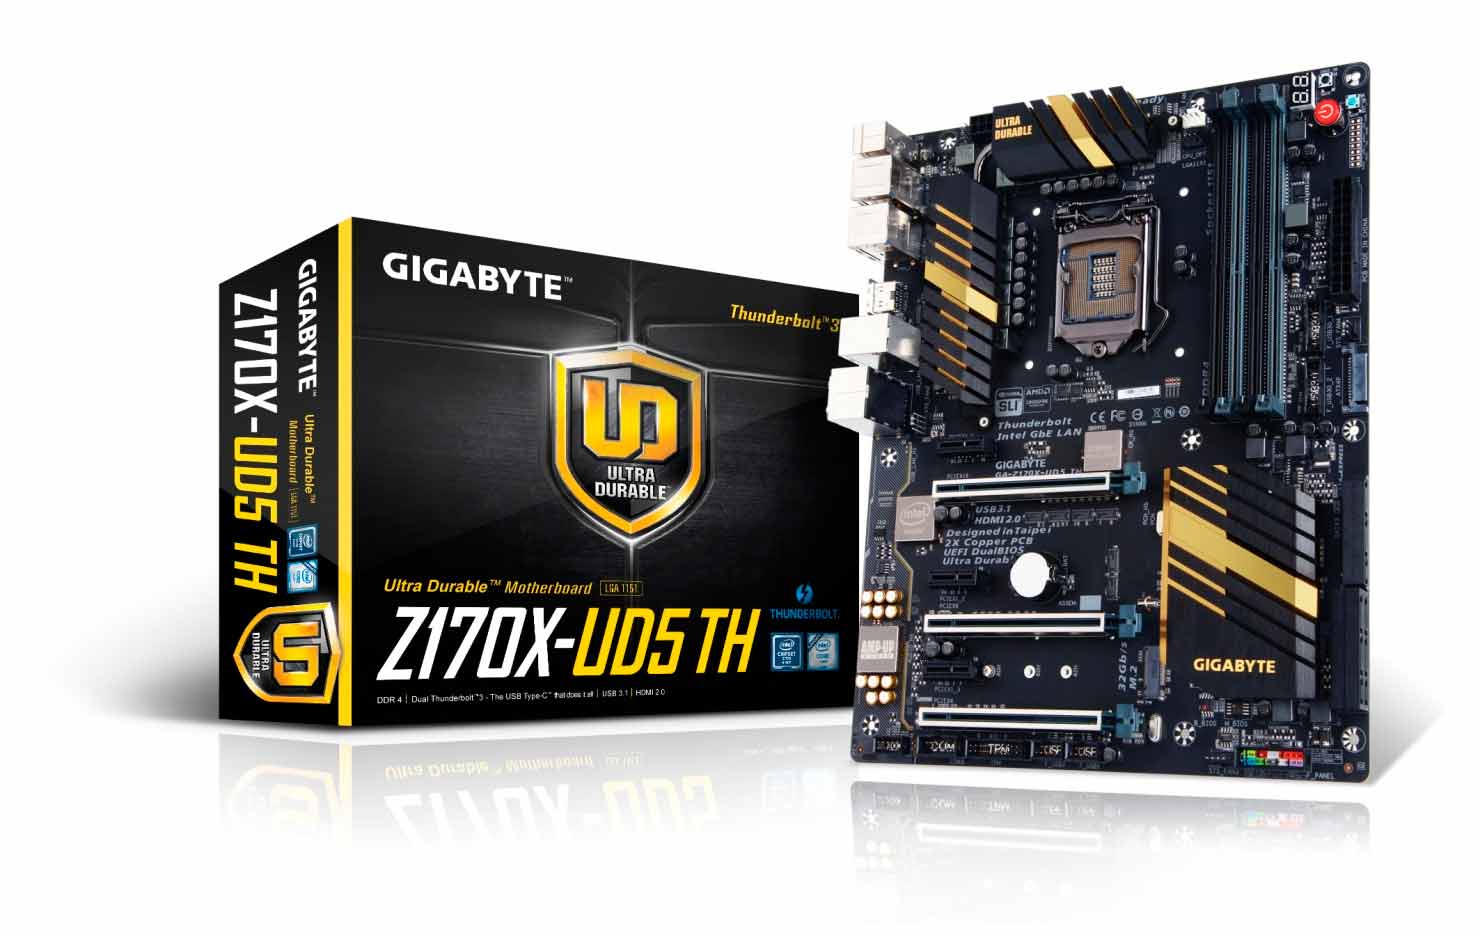 gigabyte-z170x-ud5-th-review